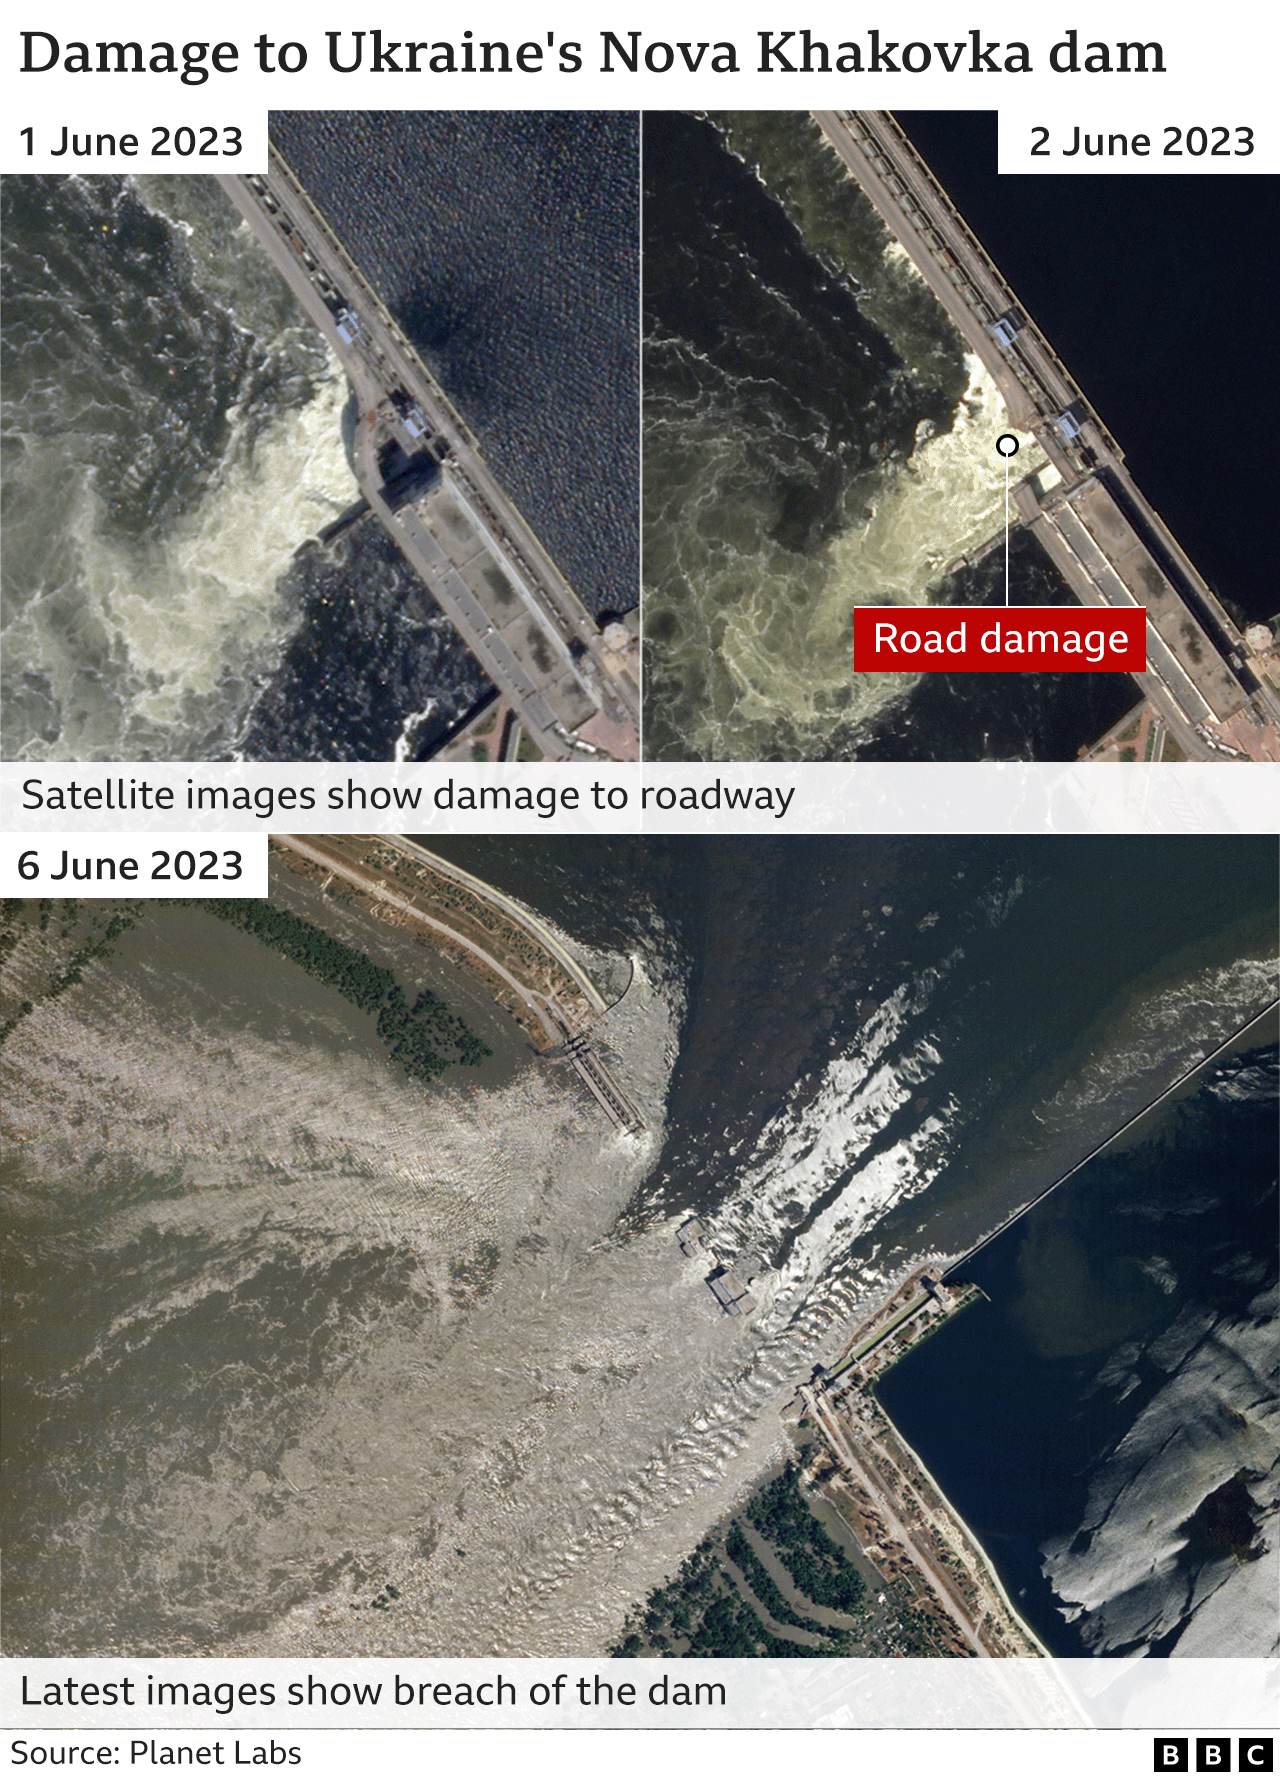 Satellite images show damage to the dam before the breach on 6 June